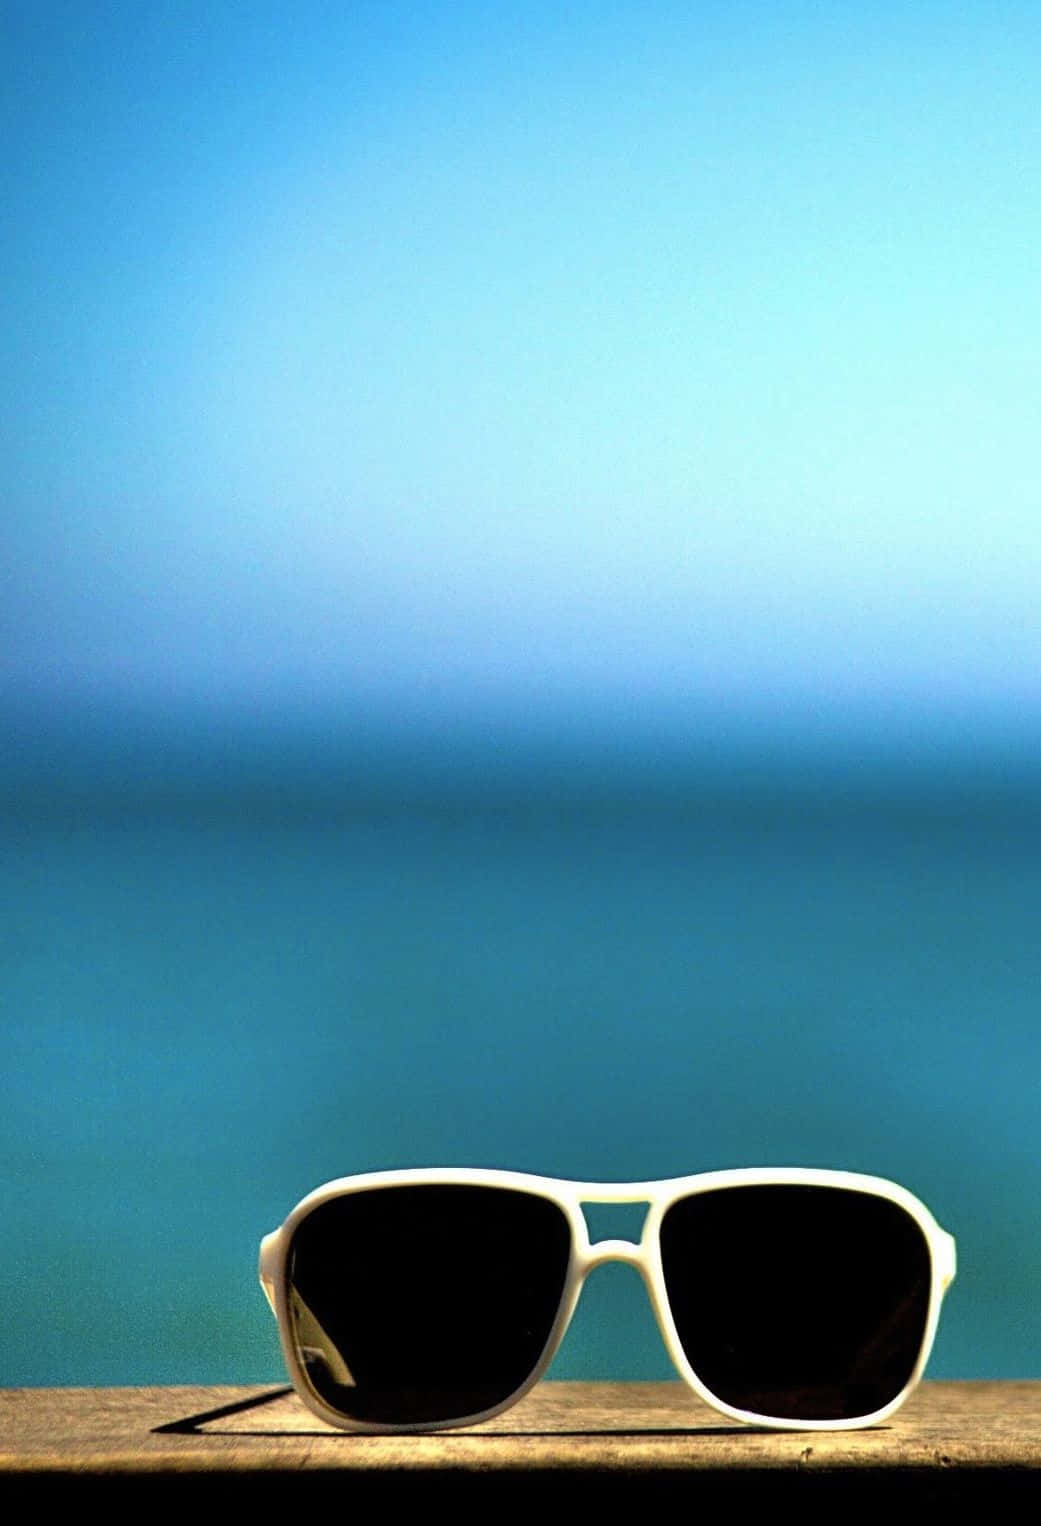 Sunglasses On A Wooden Table With The Ocean In The Background Wallpaper